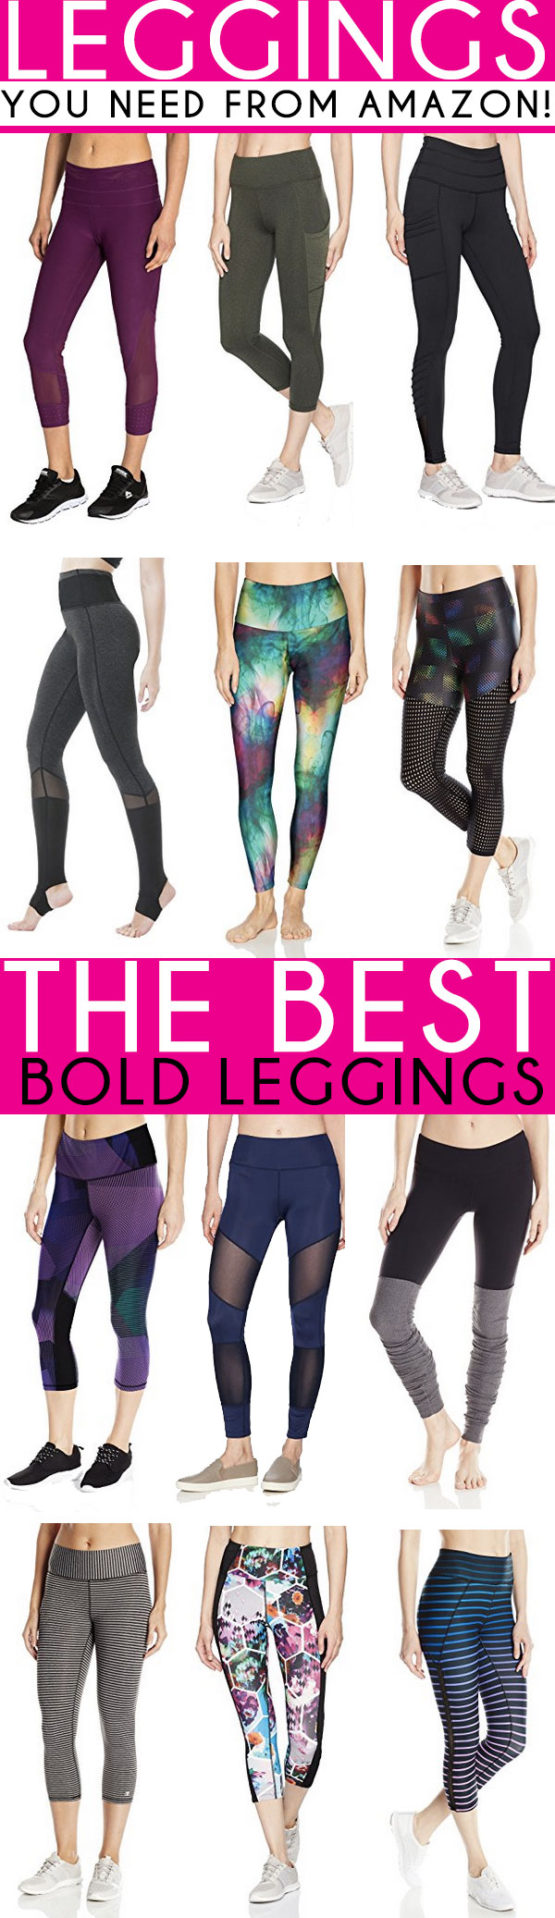 The BEST Leggings on Amazon | Athletic Wear from Amazon